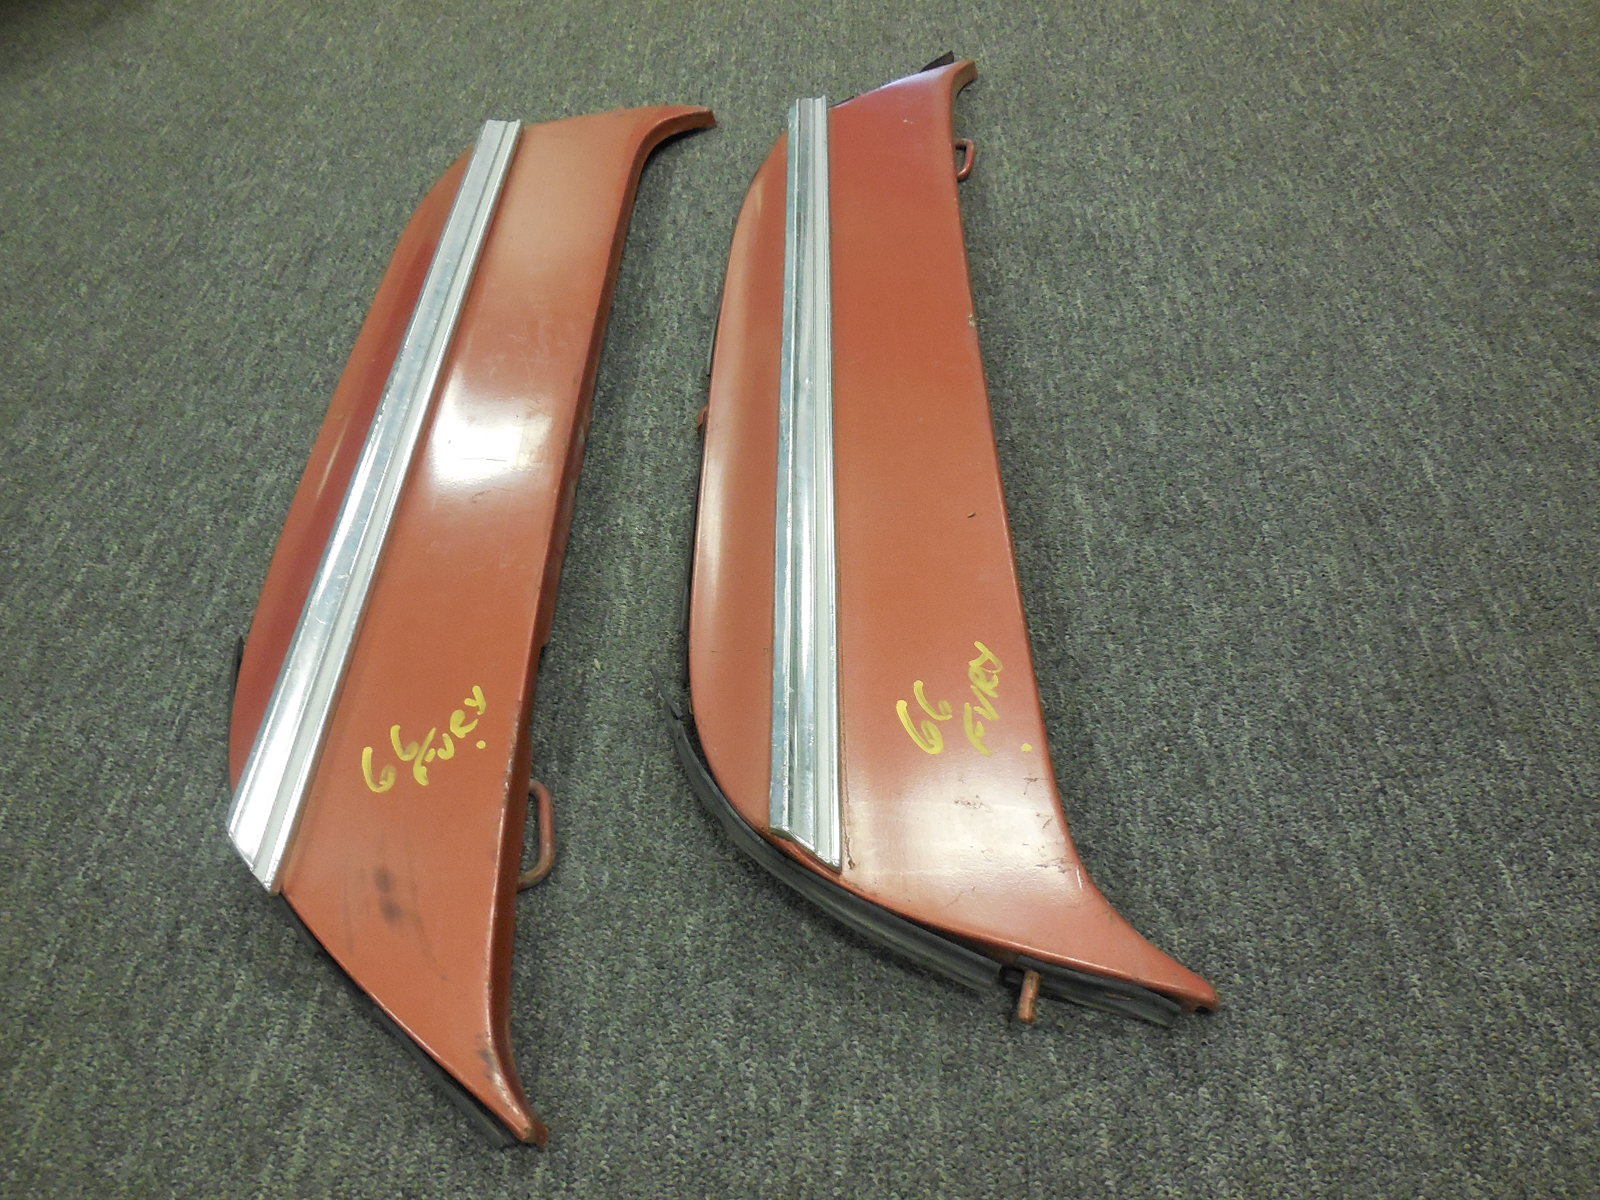 1966 Plymouth Fury Fender Skirts